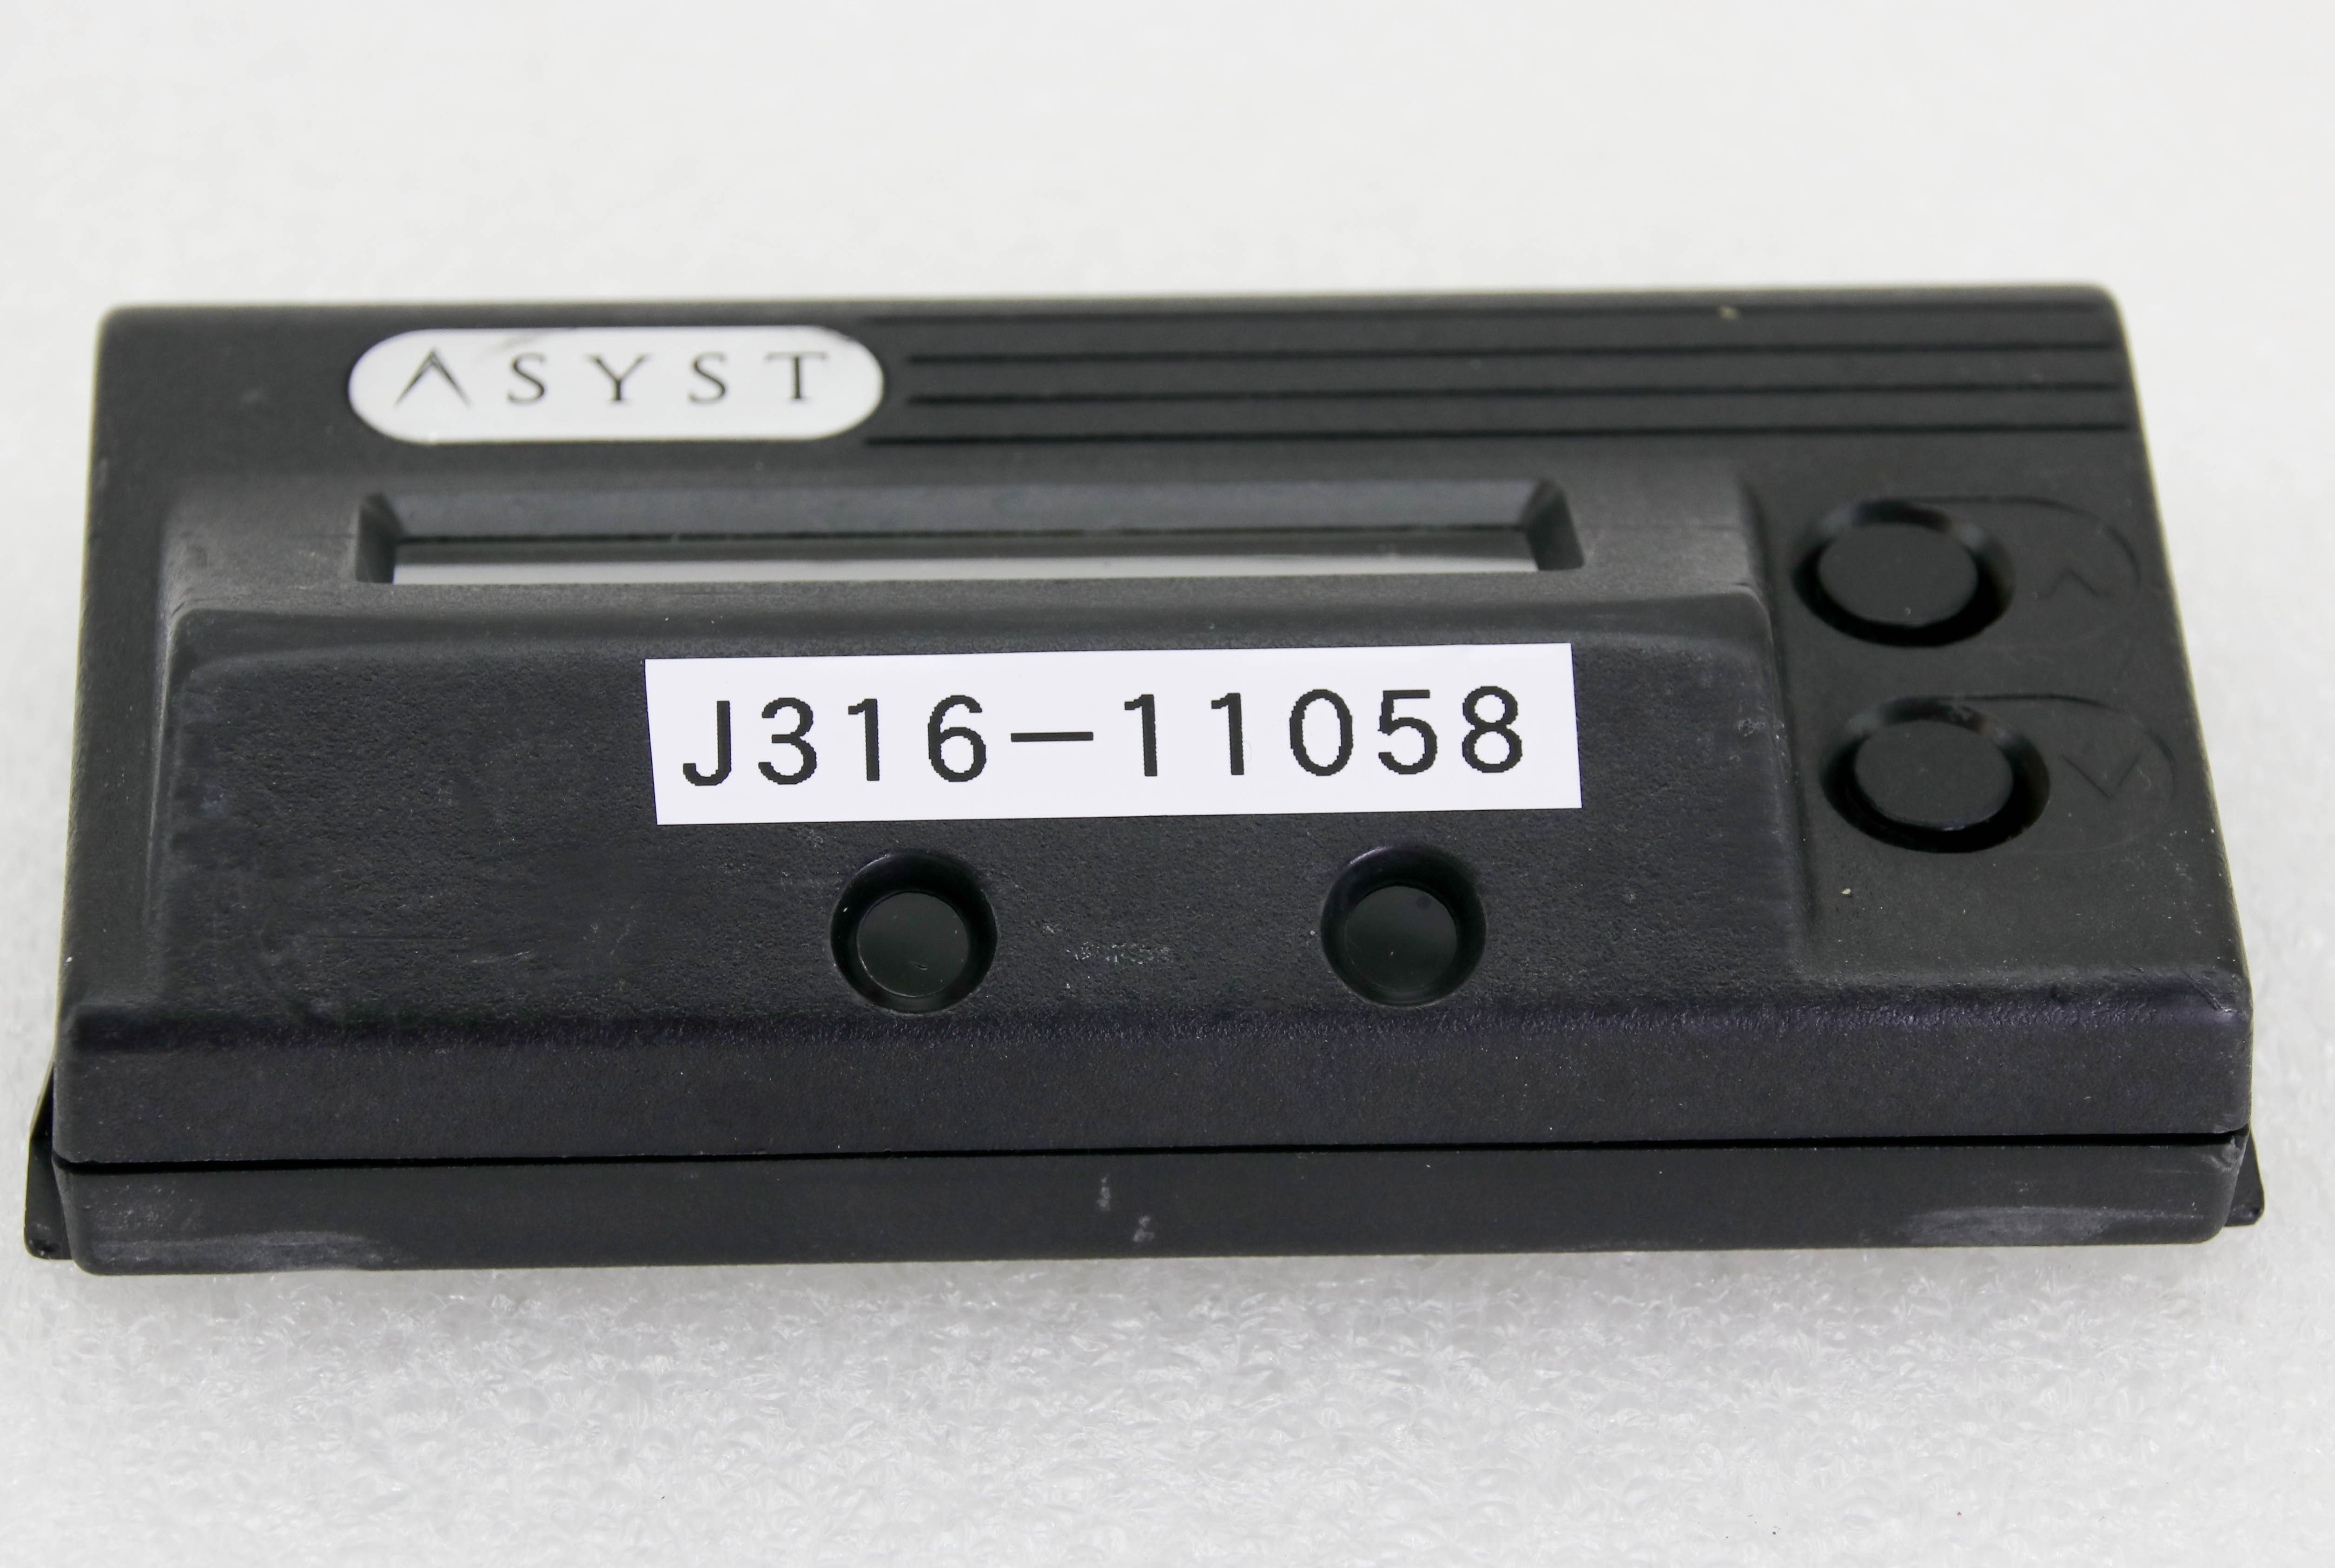 Asyst ST-8240 Smart Tag Lot of 2 